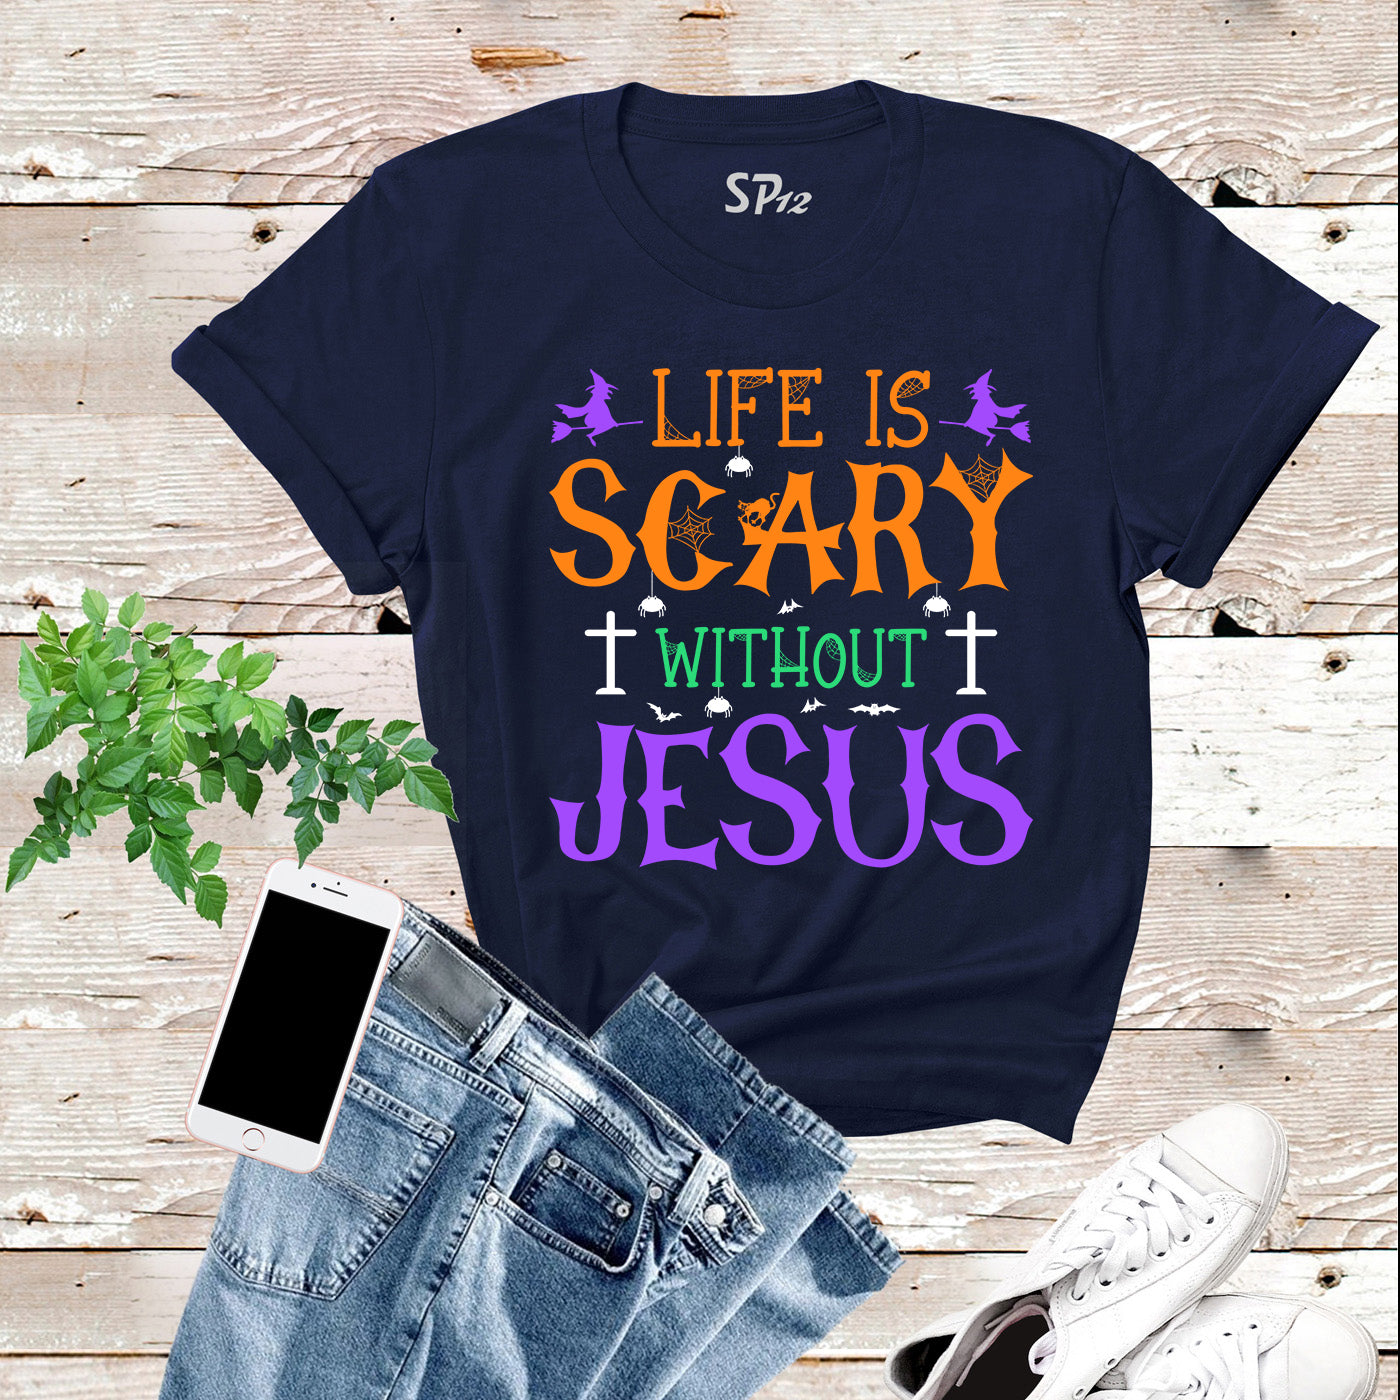 Life is Scary Without Jesus T Shirt